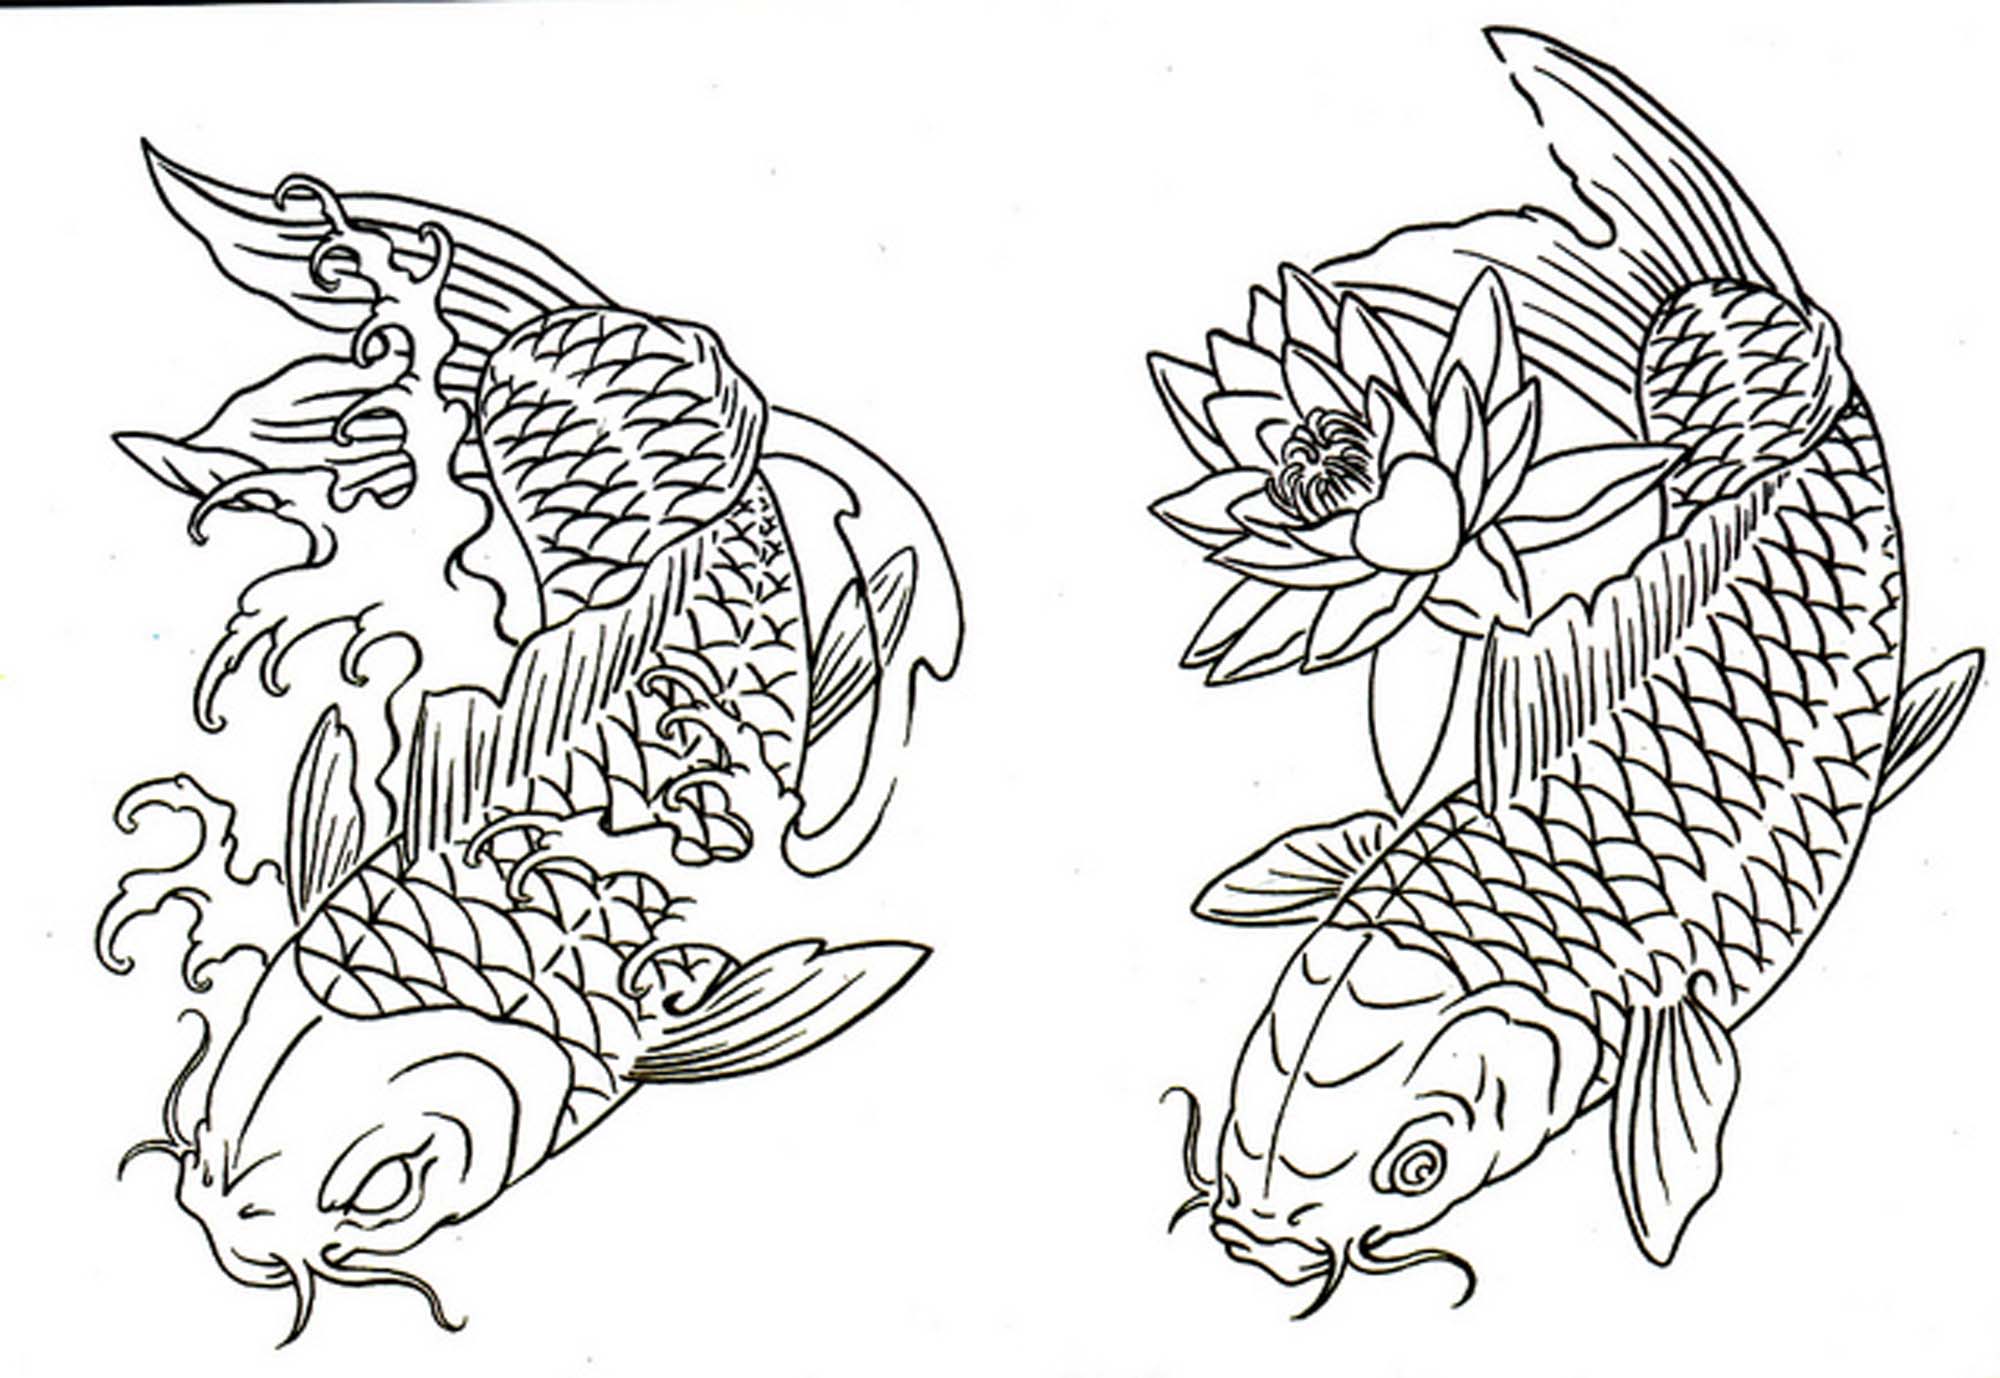 koi-fish-coloring-pages | | BestAppsForKids.com